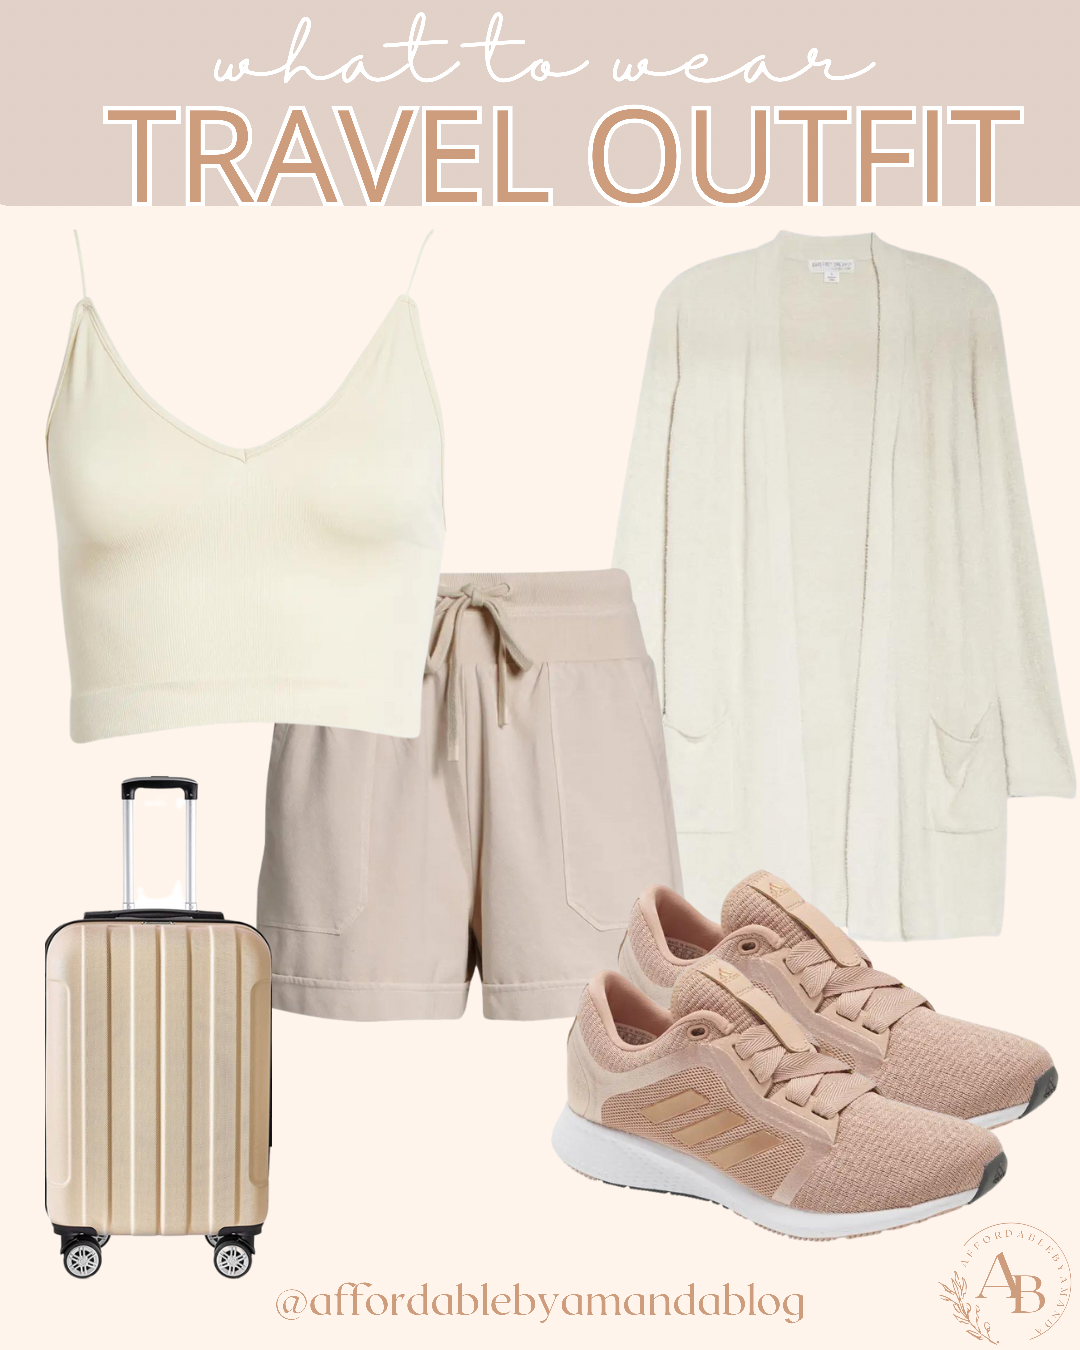 Summer Airplane Travel Outfits - Best Travel Outfits 2021 - Best Travel Outfits for Long Flights - Cute and Comfy Travel Outfits